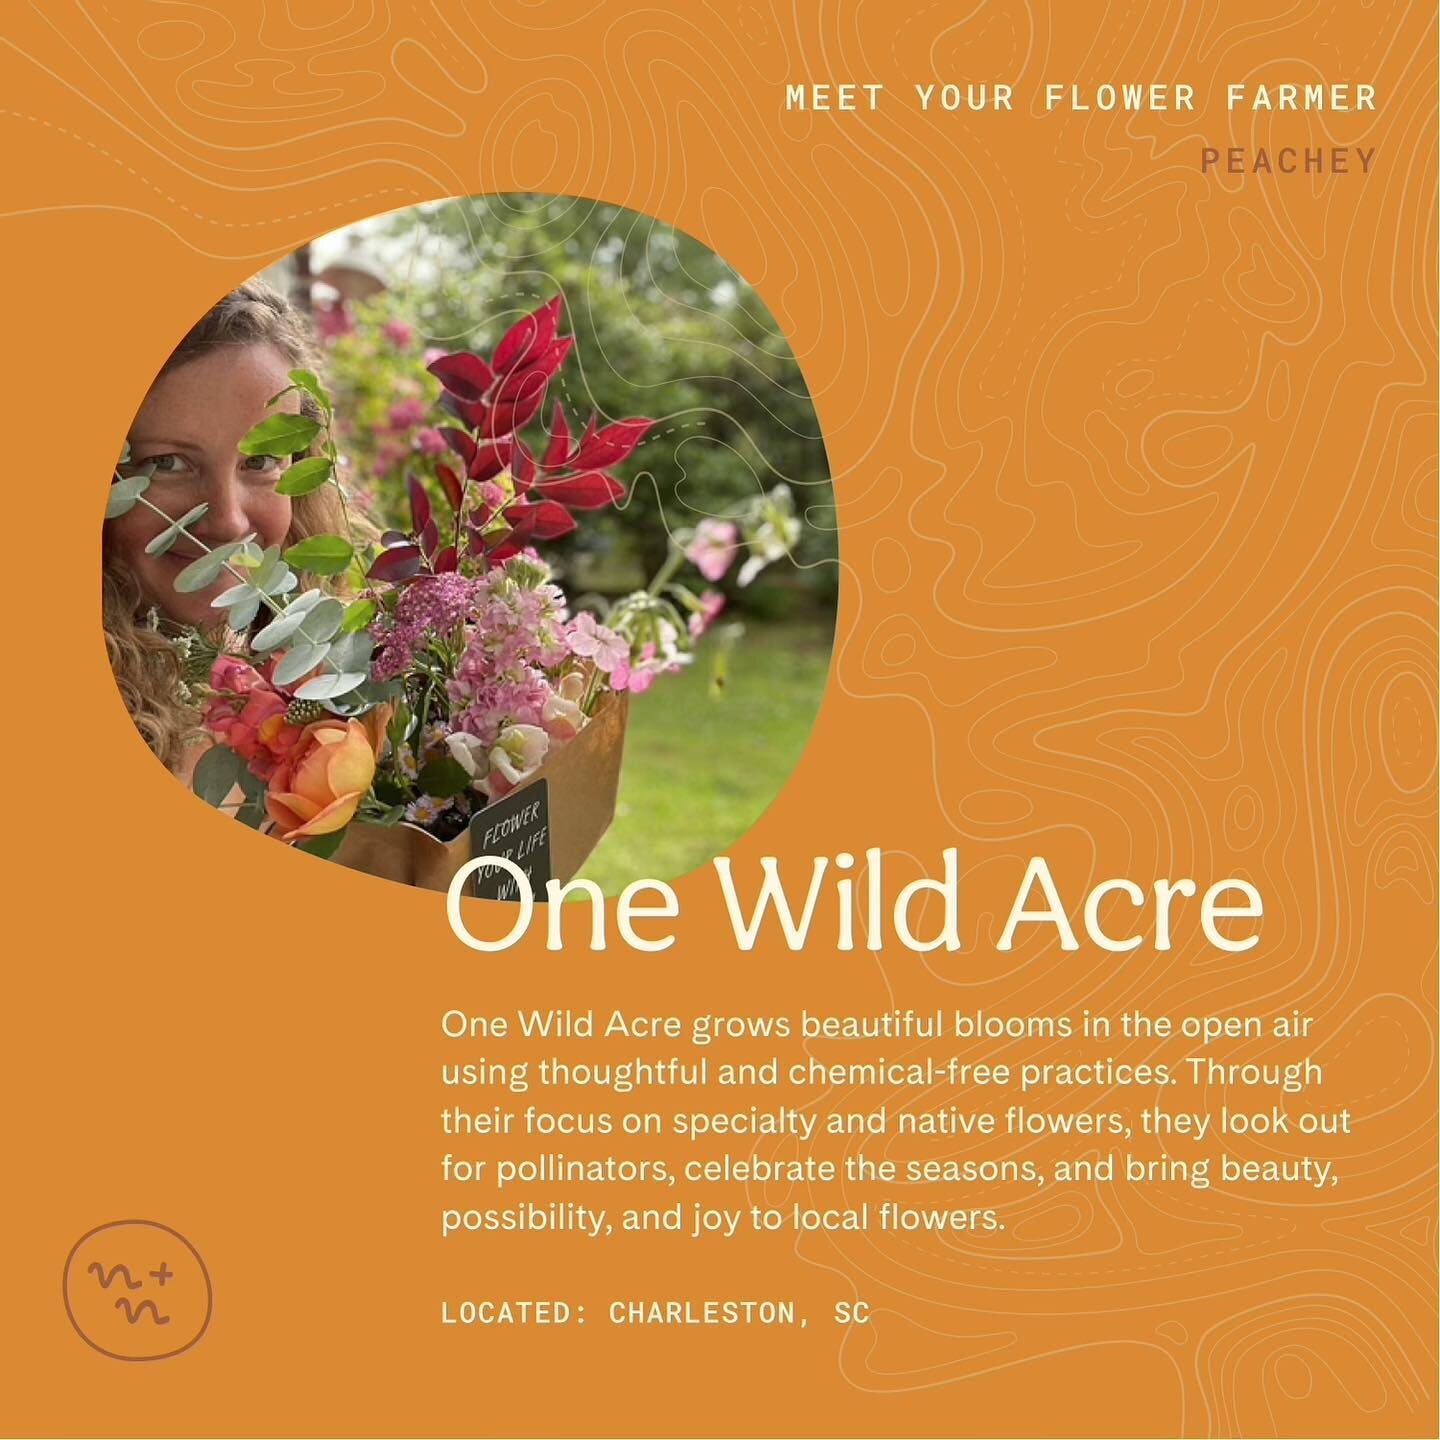 I reached out to Peachey @ouronewildacre when I first moved here and wanted to offer flowers to new families. I loved her push for slow flowers and prioritizing natives, AND she makes the most beautiful bouquets. As a mom herself she was down to help